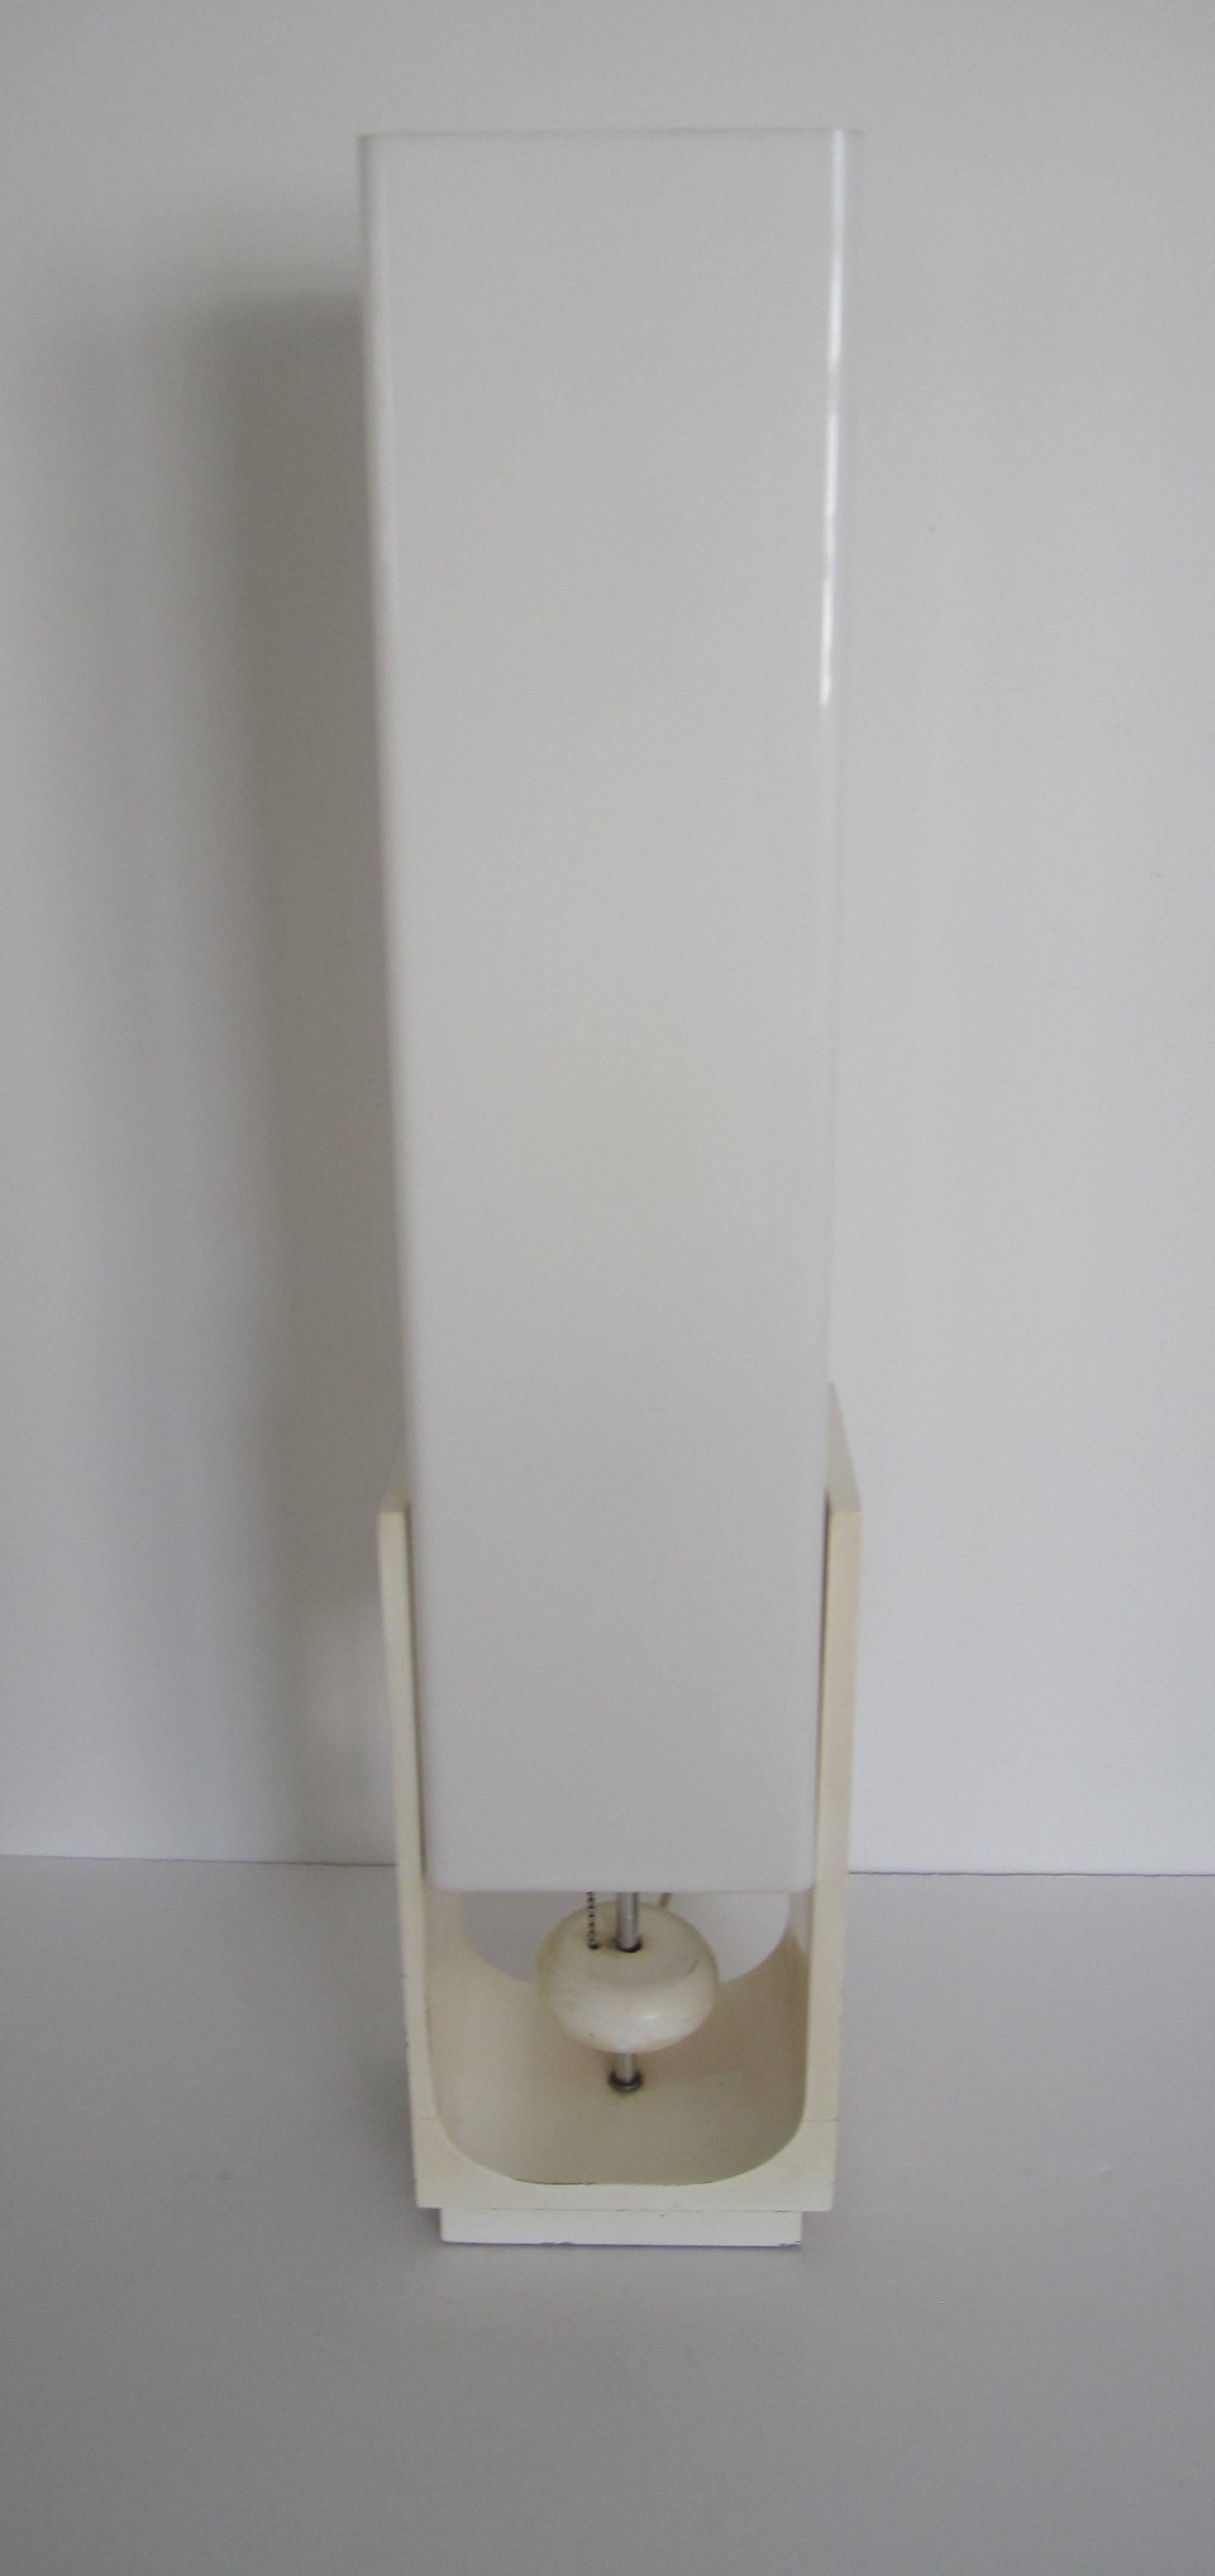 A tall Modern white acrylic or Lucite style and white lacquered wood table or low floor lamp, with a white wood 'ball' on/off switch a center base area, circa mid-20th century, 1960s. Fixture can handle a three-way bulb. In working order.